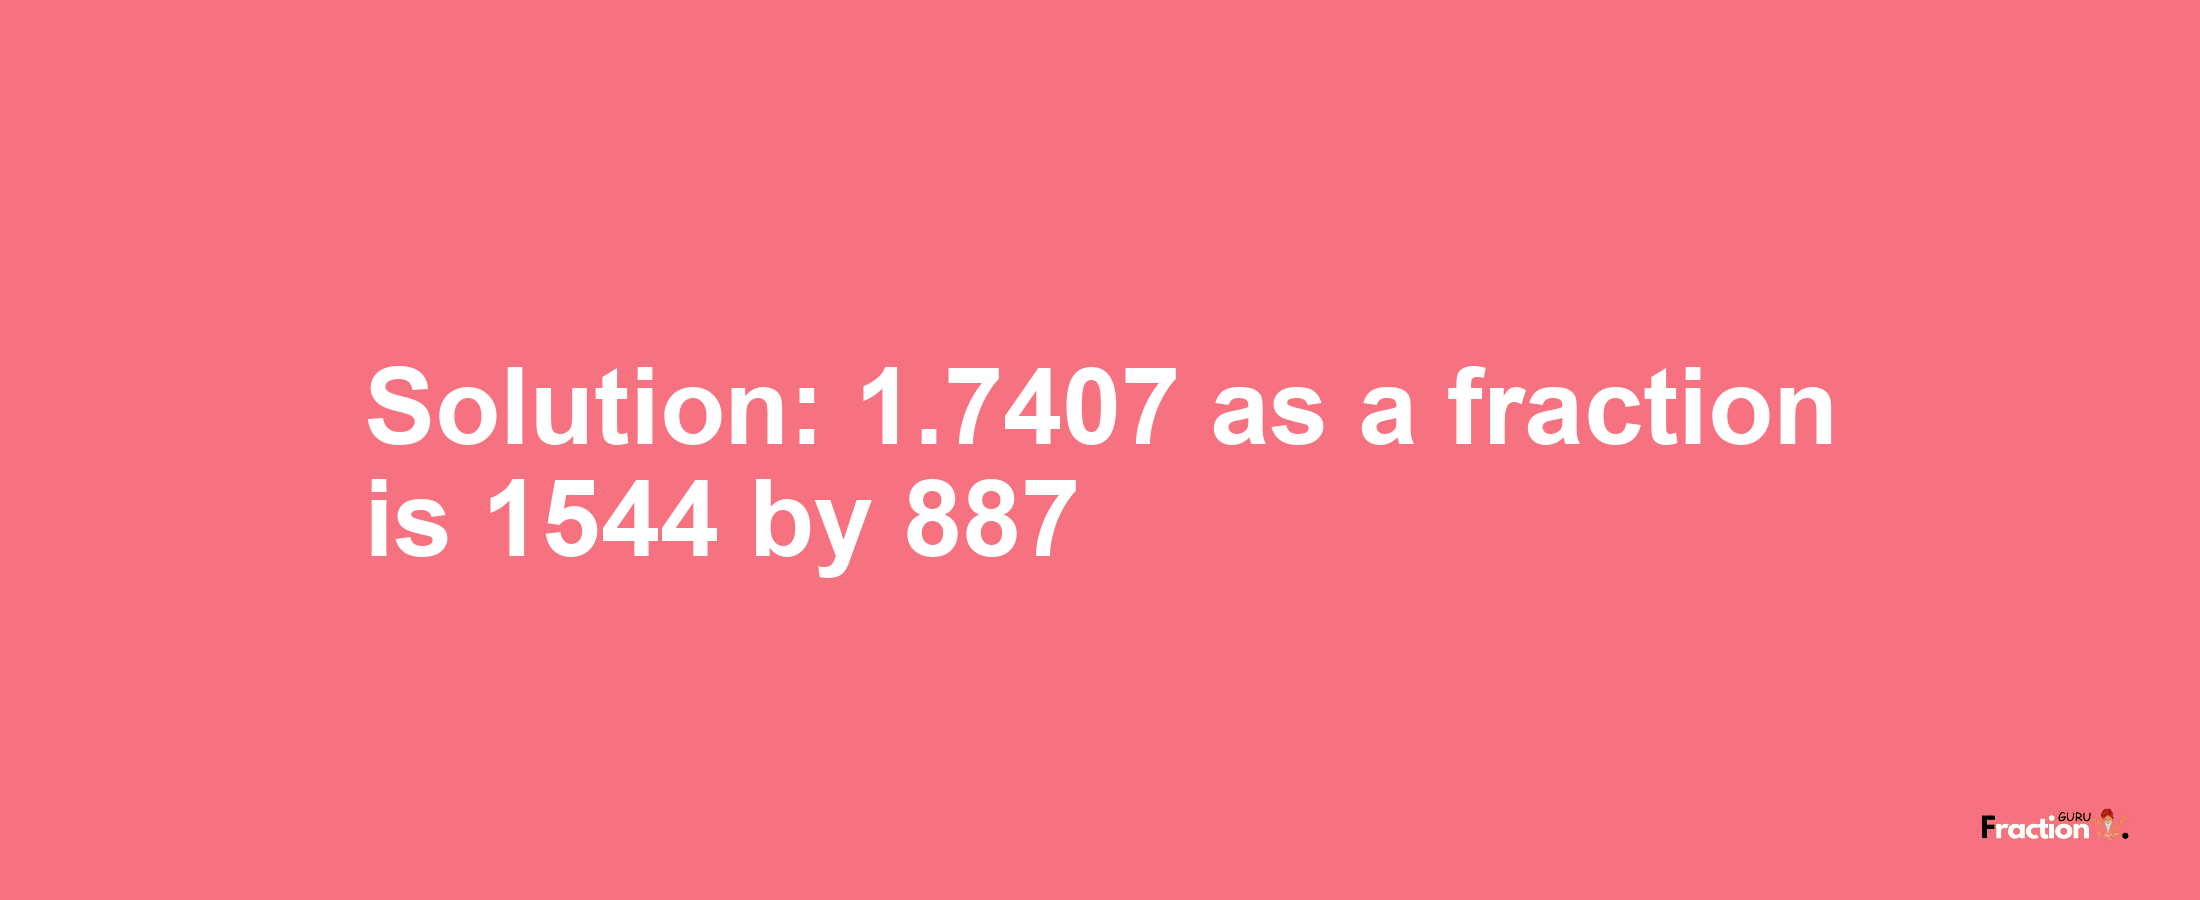 Solution:1.7407 as a fraction is 1544/887